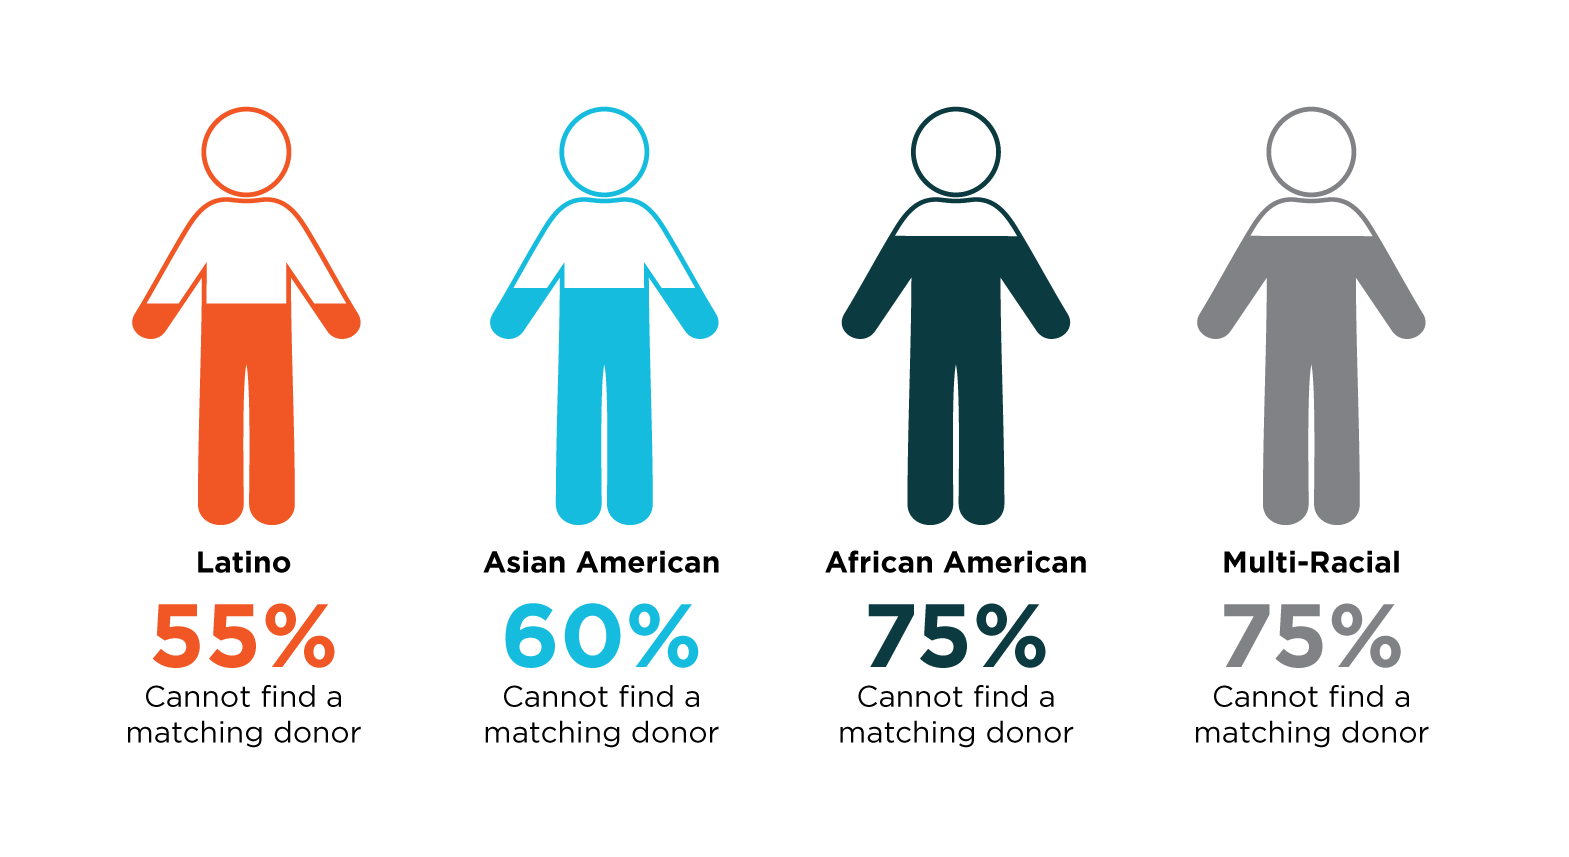 Statistics show that 55% of Hispanics/Latinos, 60% of Asian Americans, 75% of African Americans and 75% of Multi-Racial/Hapa individuals are unable to find a marrow donor due to low representation of their ethnicity in the registry.